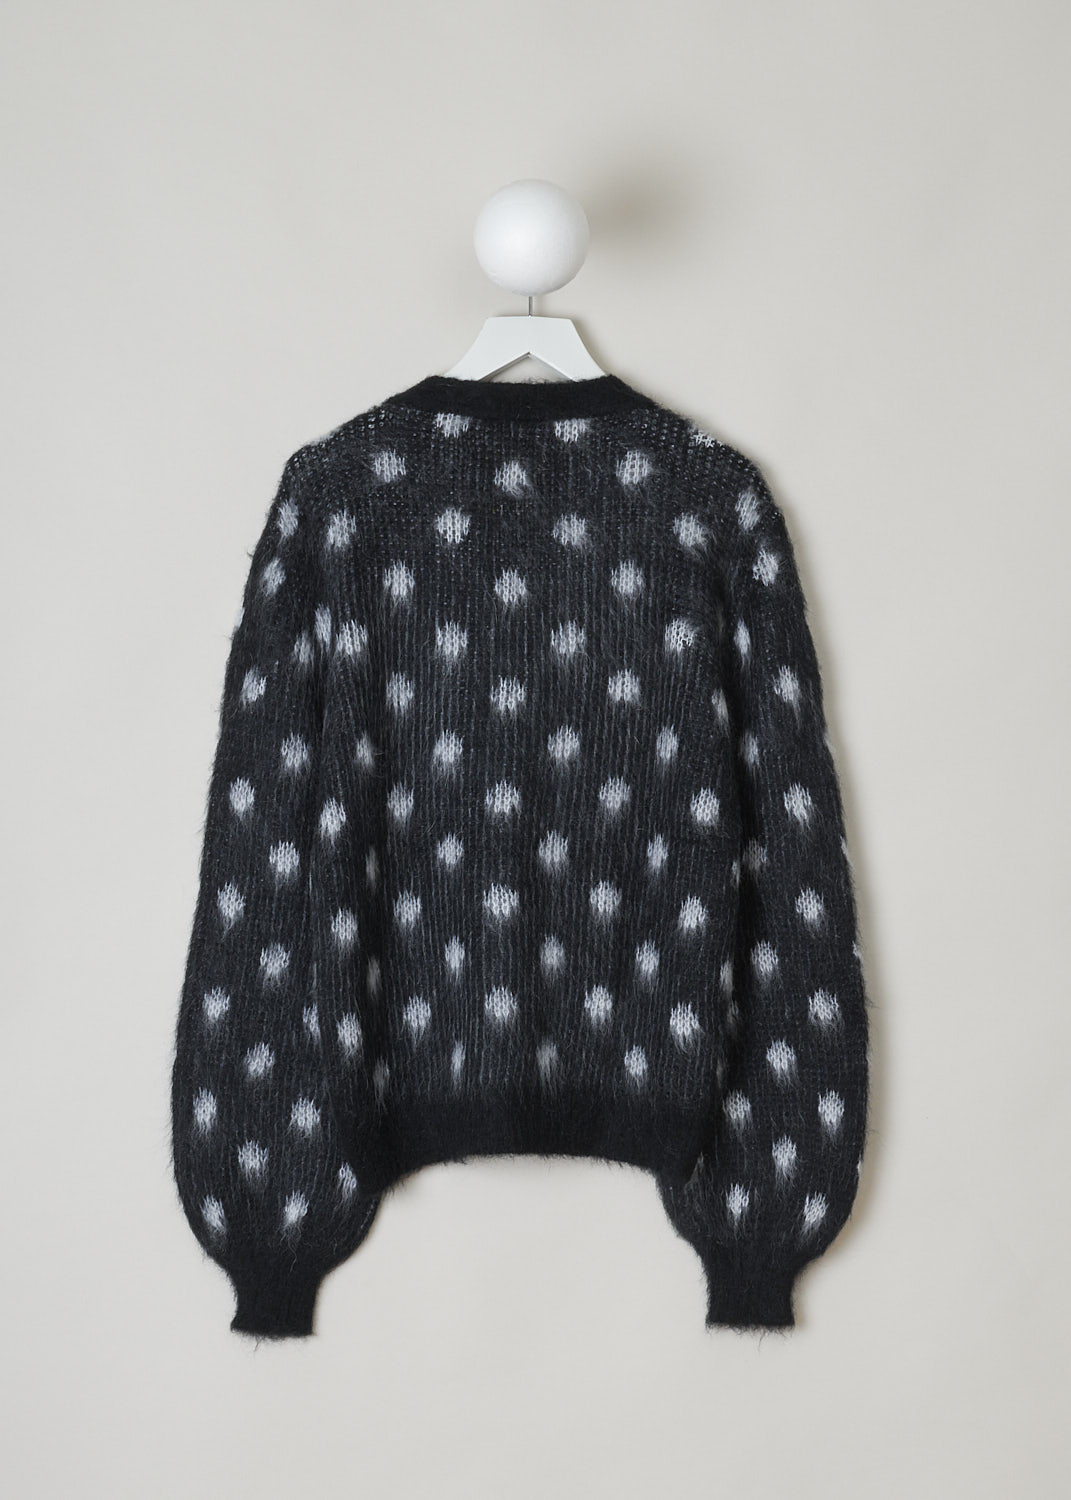 MARNI, BRUSHED DOTS FUZZY WUZZY CARDIGAN, CDMD0326Q0_UFU160_DON99, Black, Print, Grey, Back, This brushed dots Fuzzy Wuzzy cardigan has a black V-neckline with a front button closure. The sweater has a two-tone dot pattern in black and grey. The long balloon sleeves have ribbed cuffs. That same ribbed finish can be found on the hemline.
